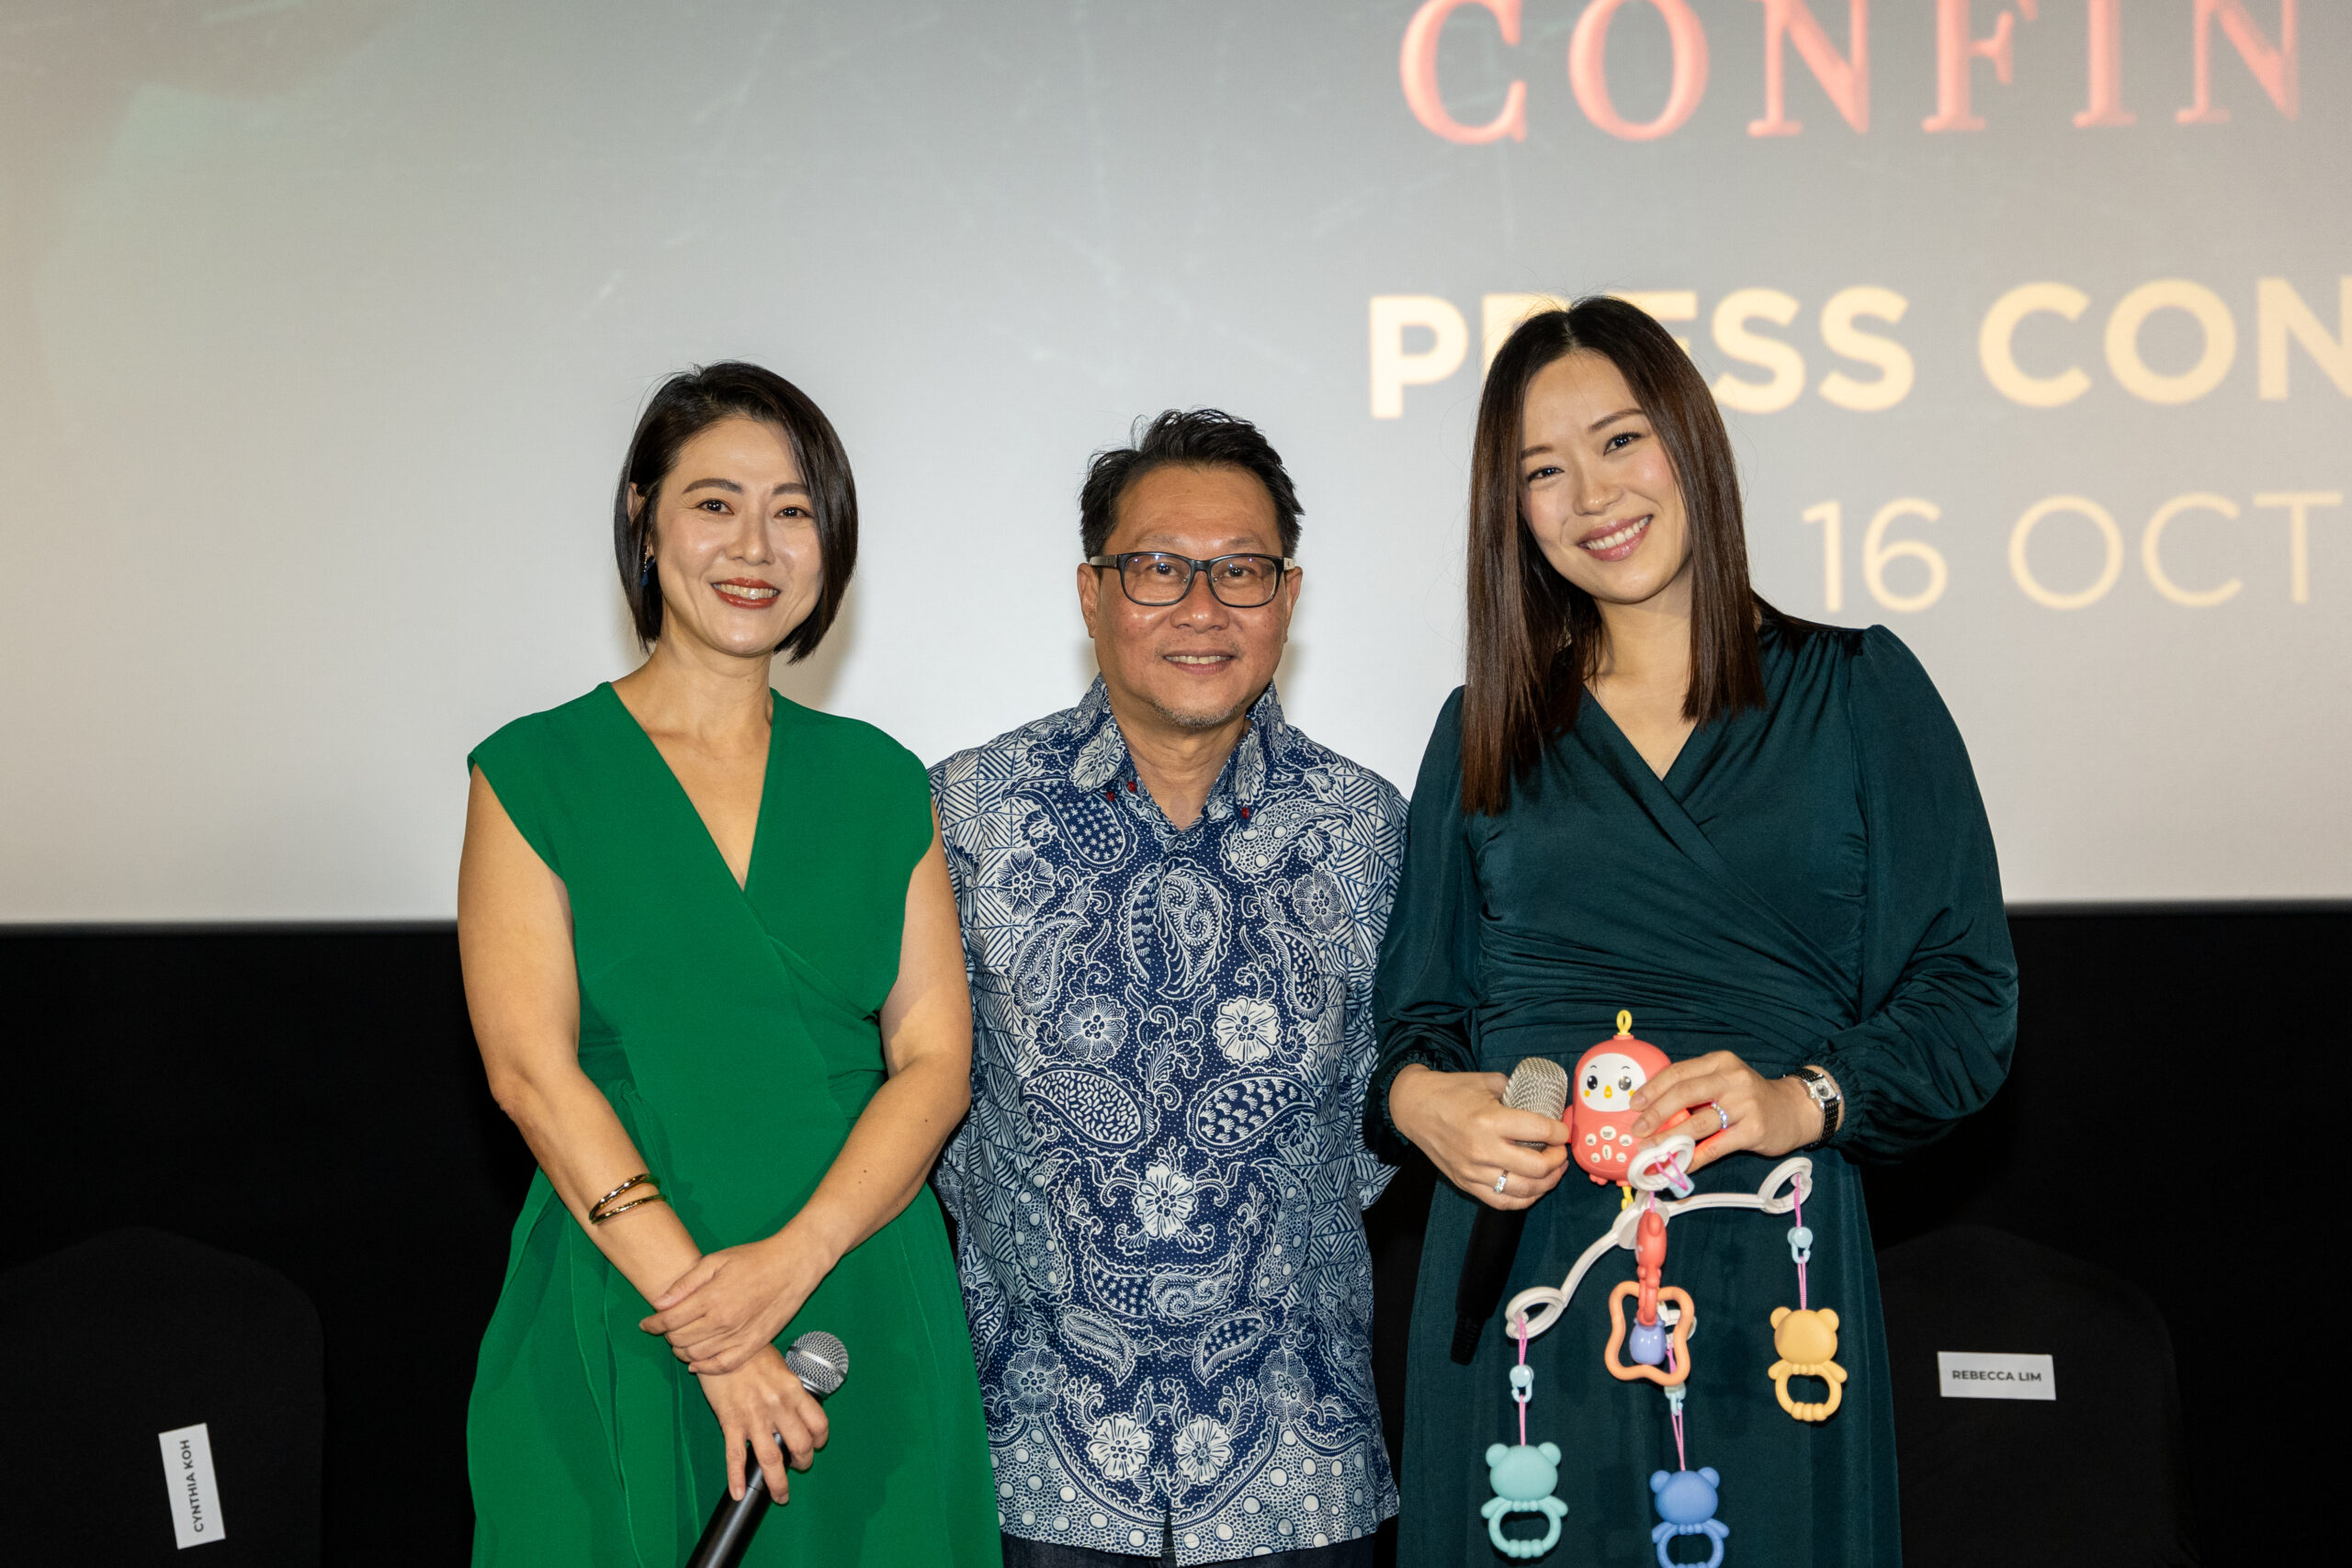 Kelvin tong, rebecca lim and cynthia koh at confinement pc malaysia